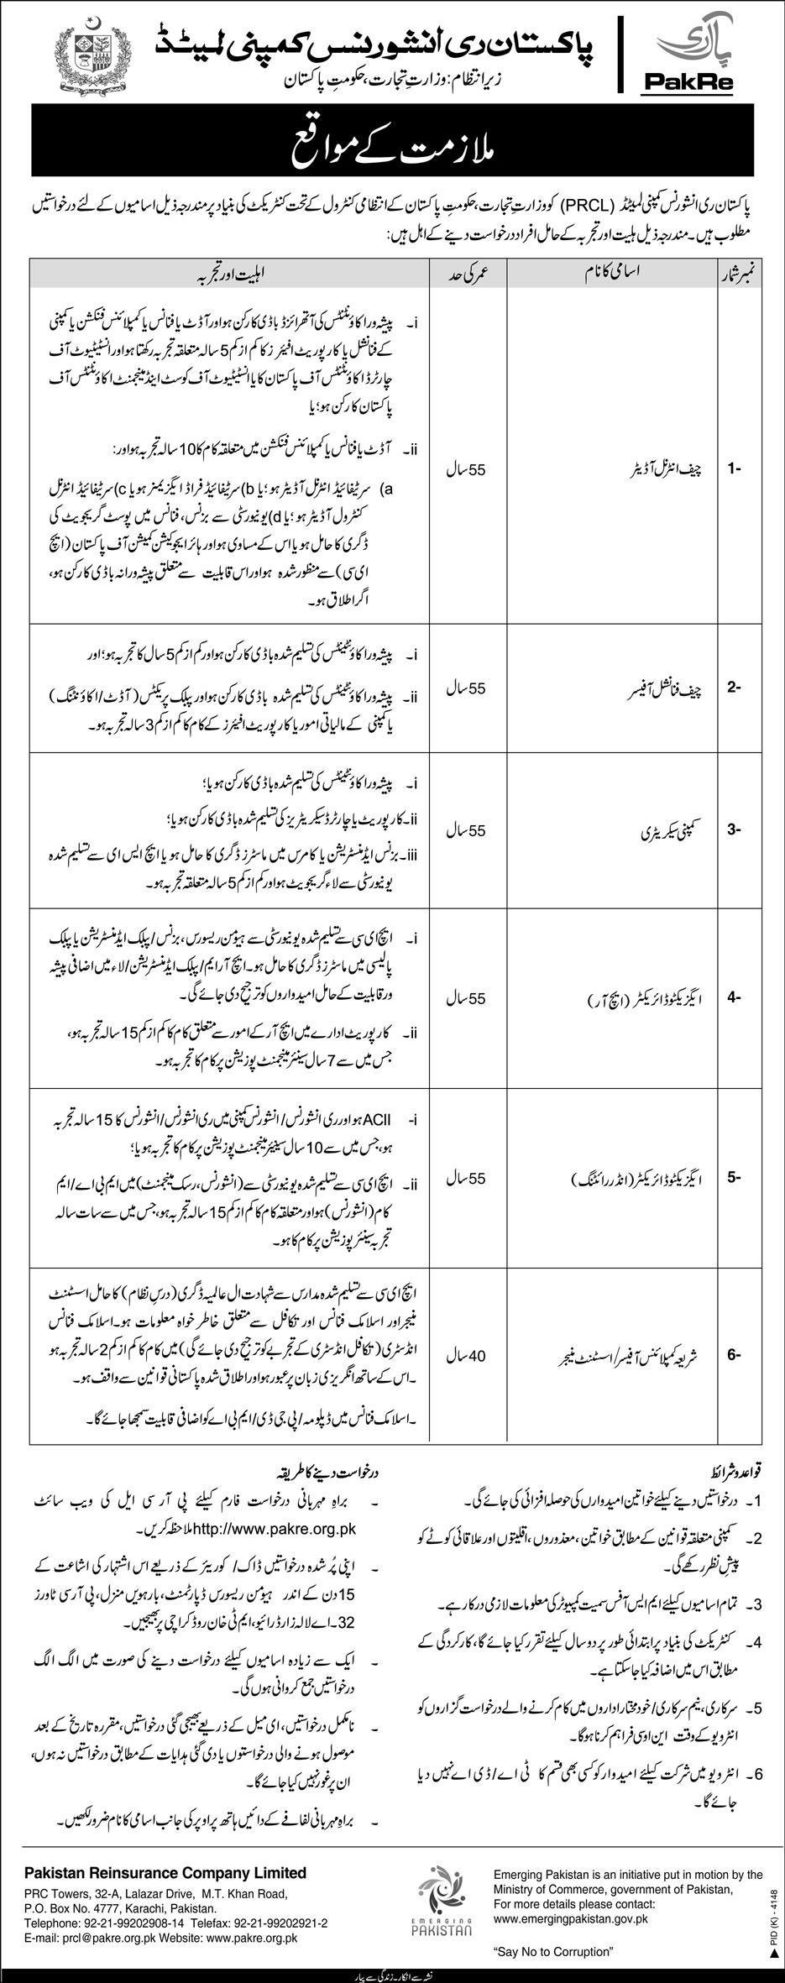 PakRe / PRCL Jobs 2019 For Shariah Compliance Officers / Assistant Managers, Admin / HR & Management Posts